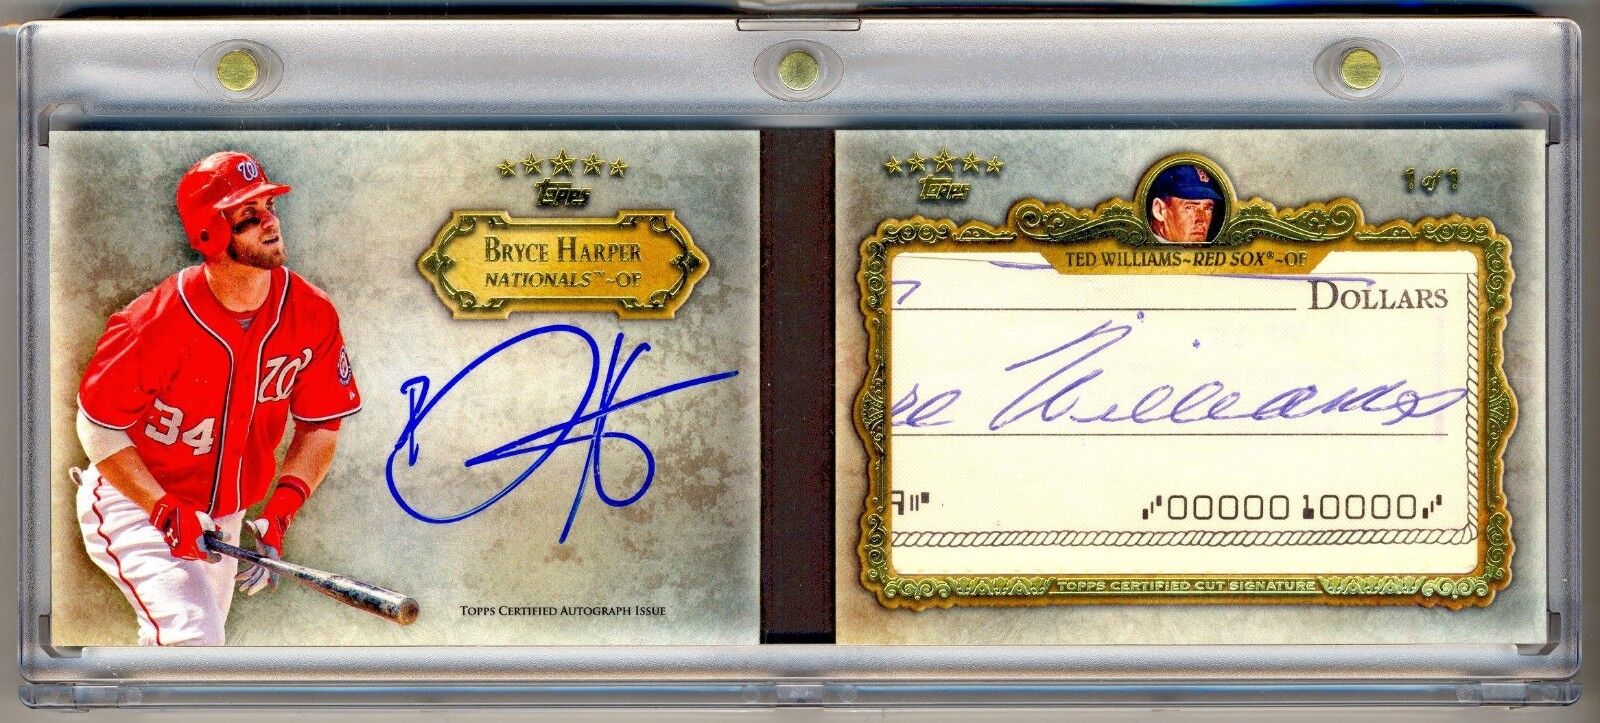 2013 Topps Five Star Signatures Booklet TED WILLIAMS BRYCE HARPER Dual AUTO 1/1